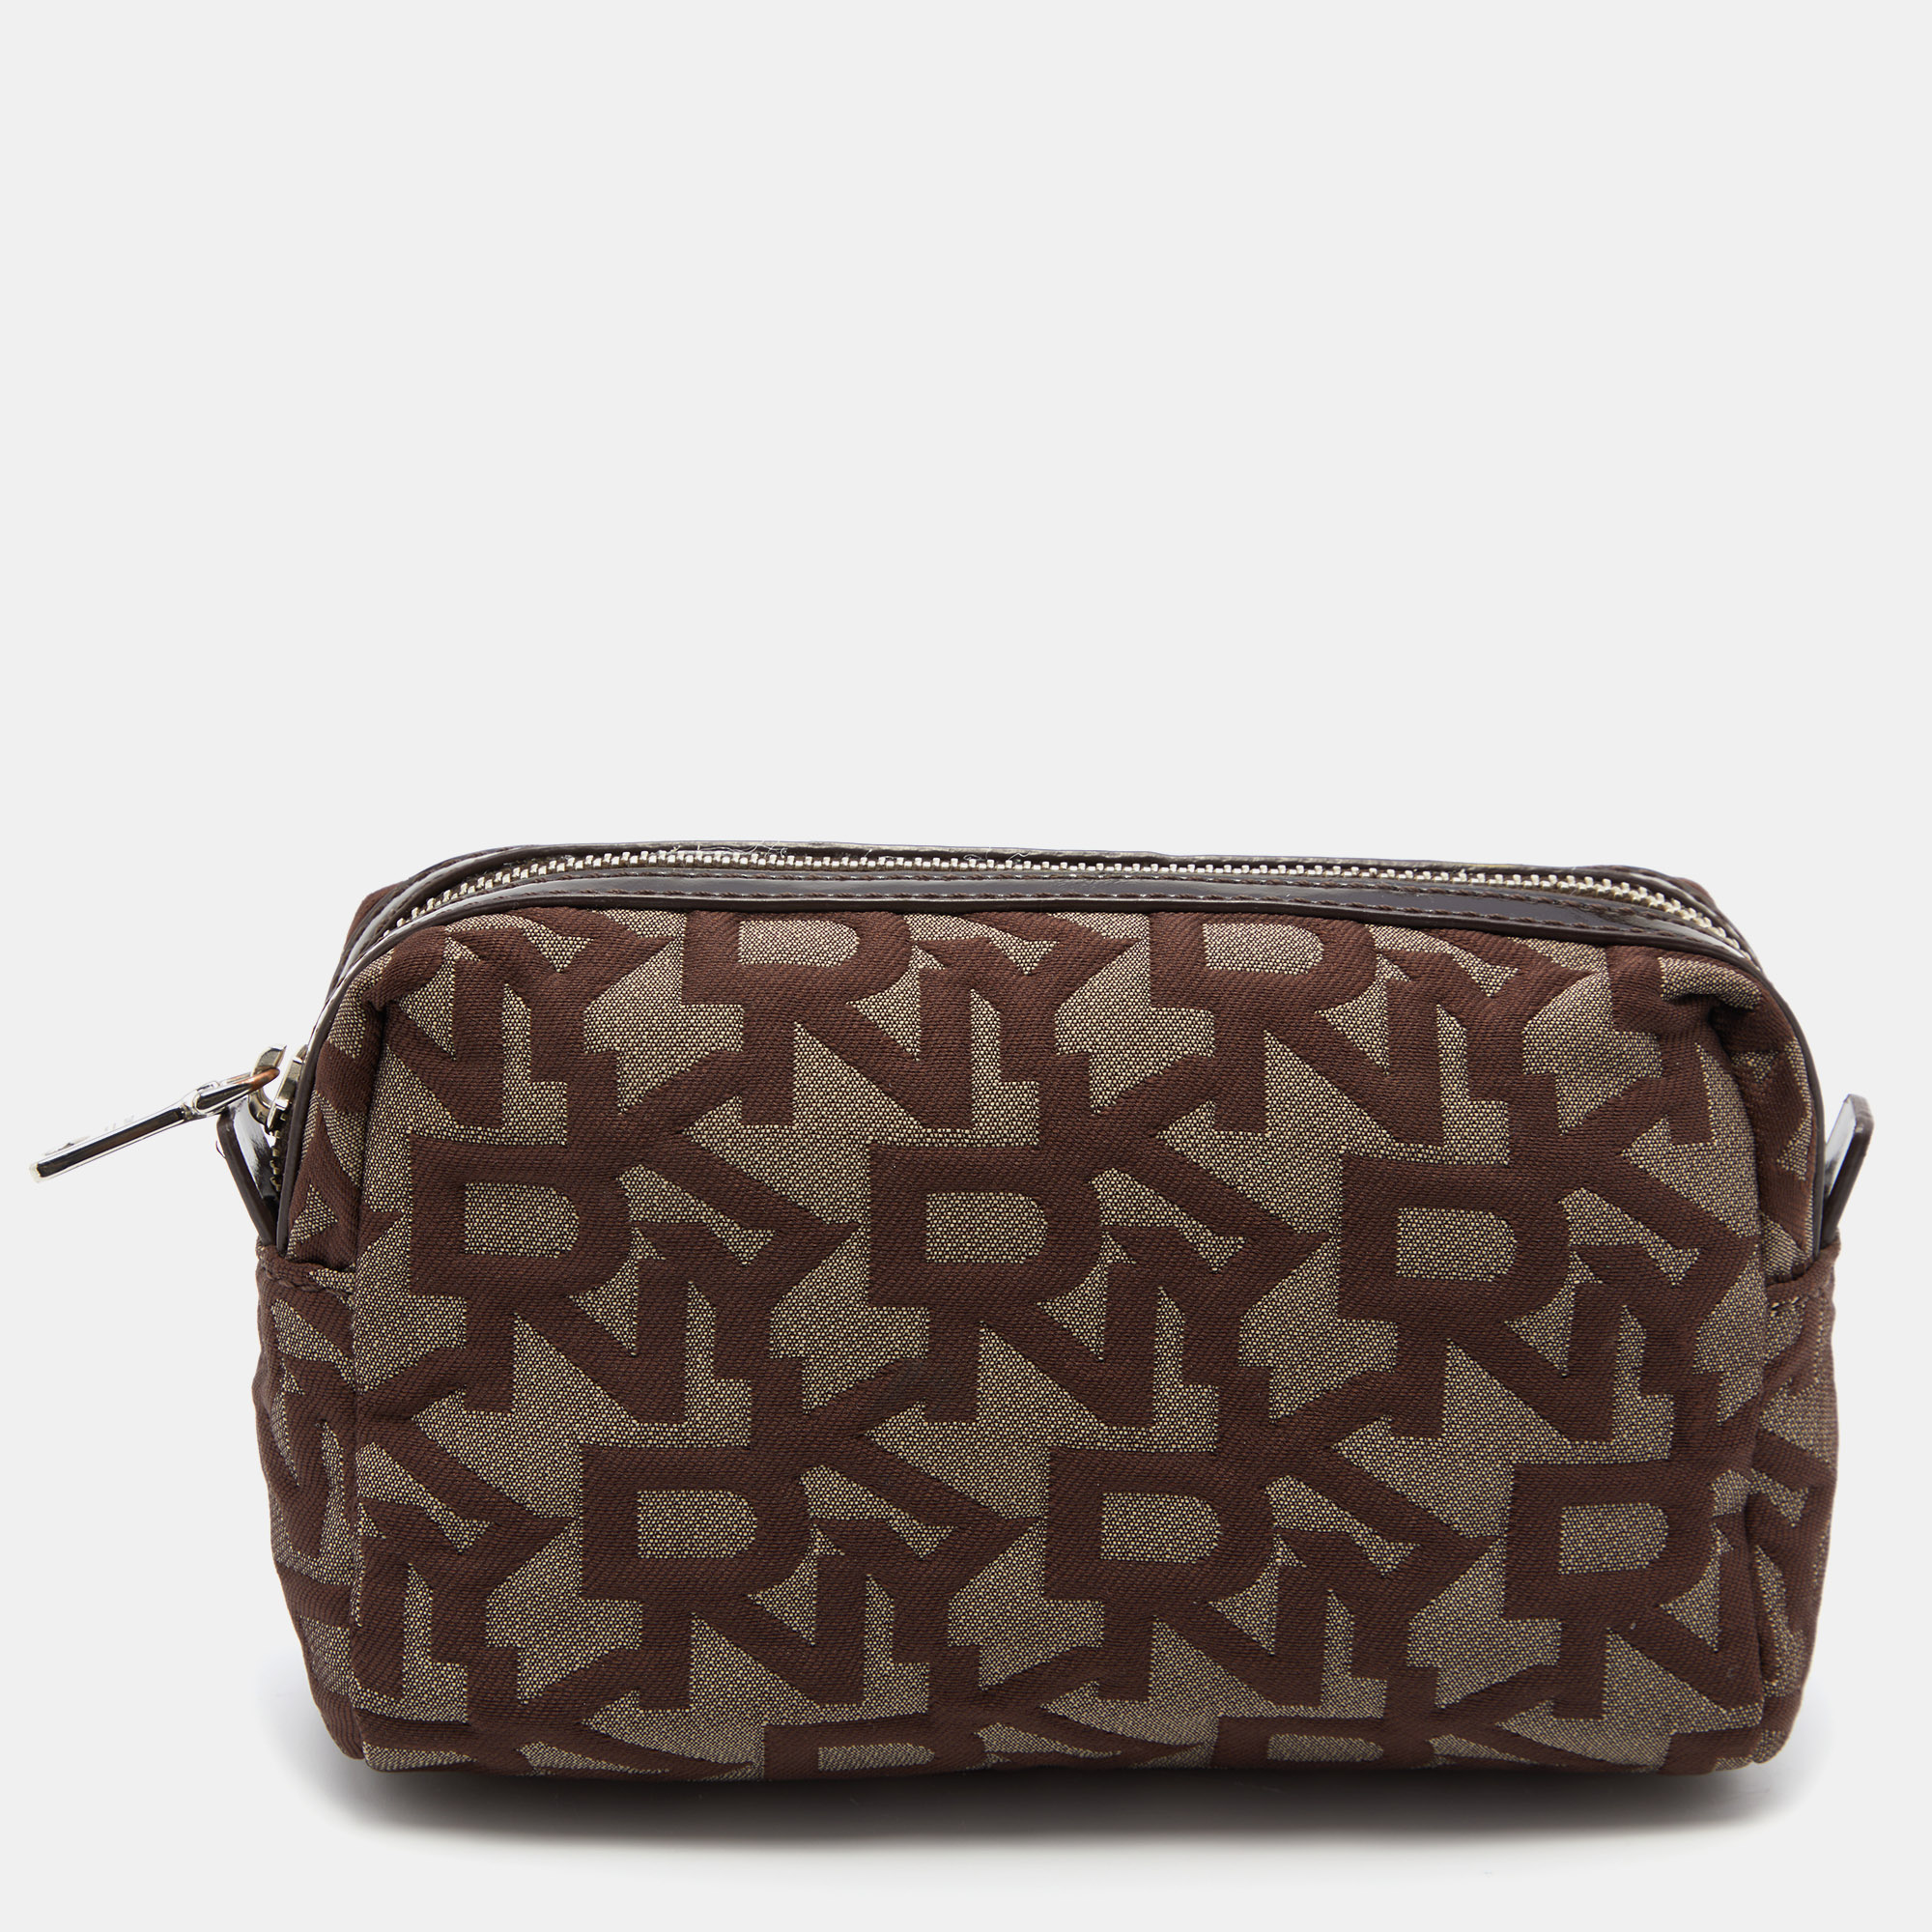 

Dkny Brown/Beige Signature Canvas and Patent Leather Pouch